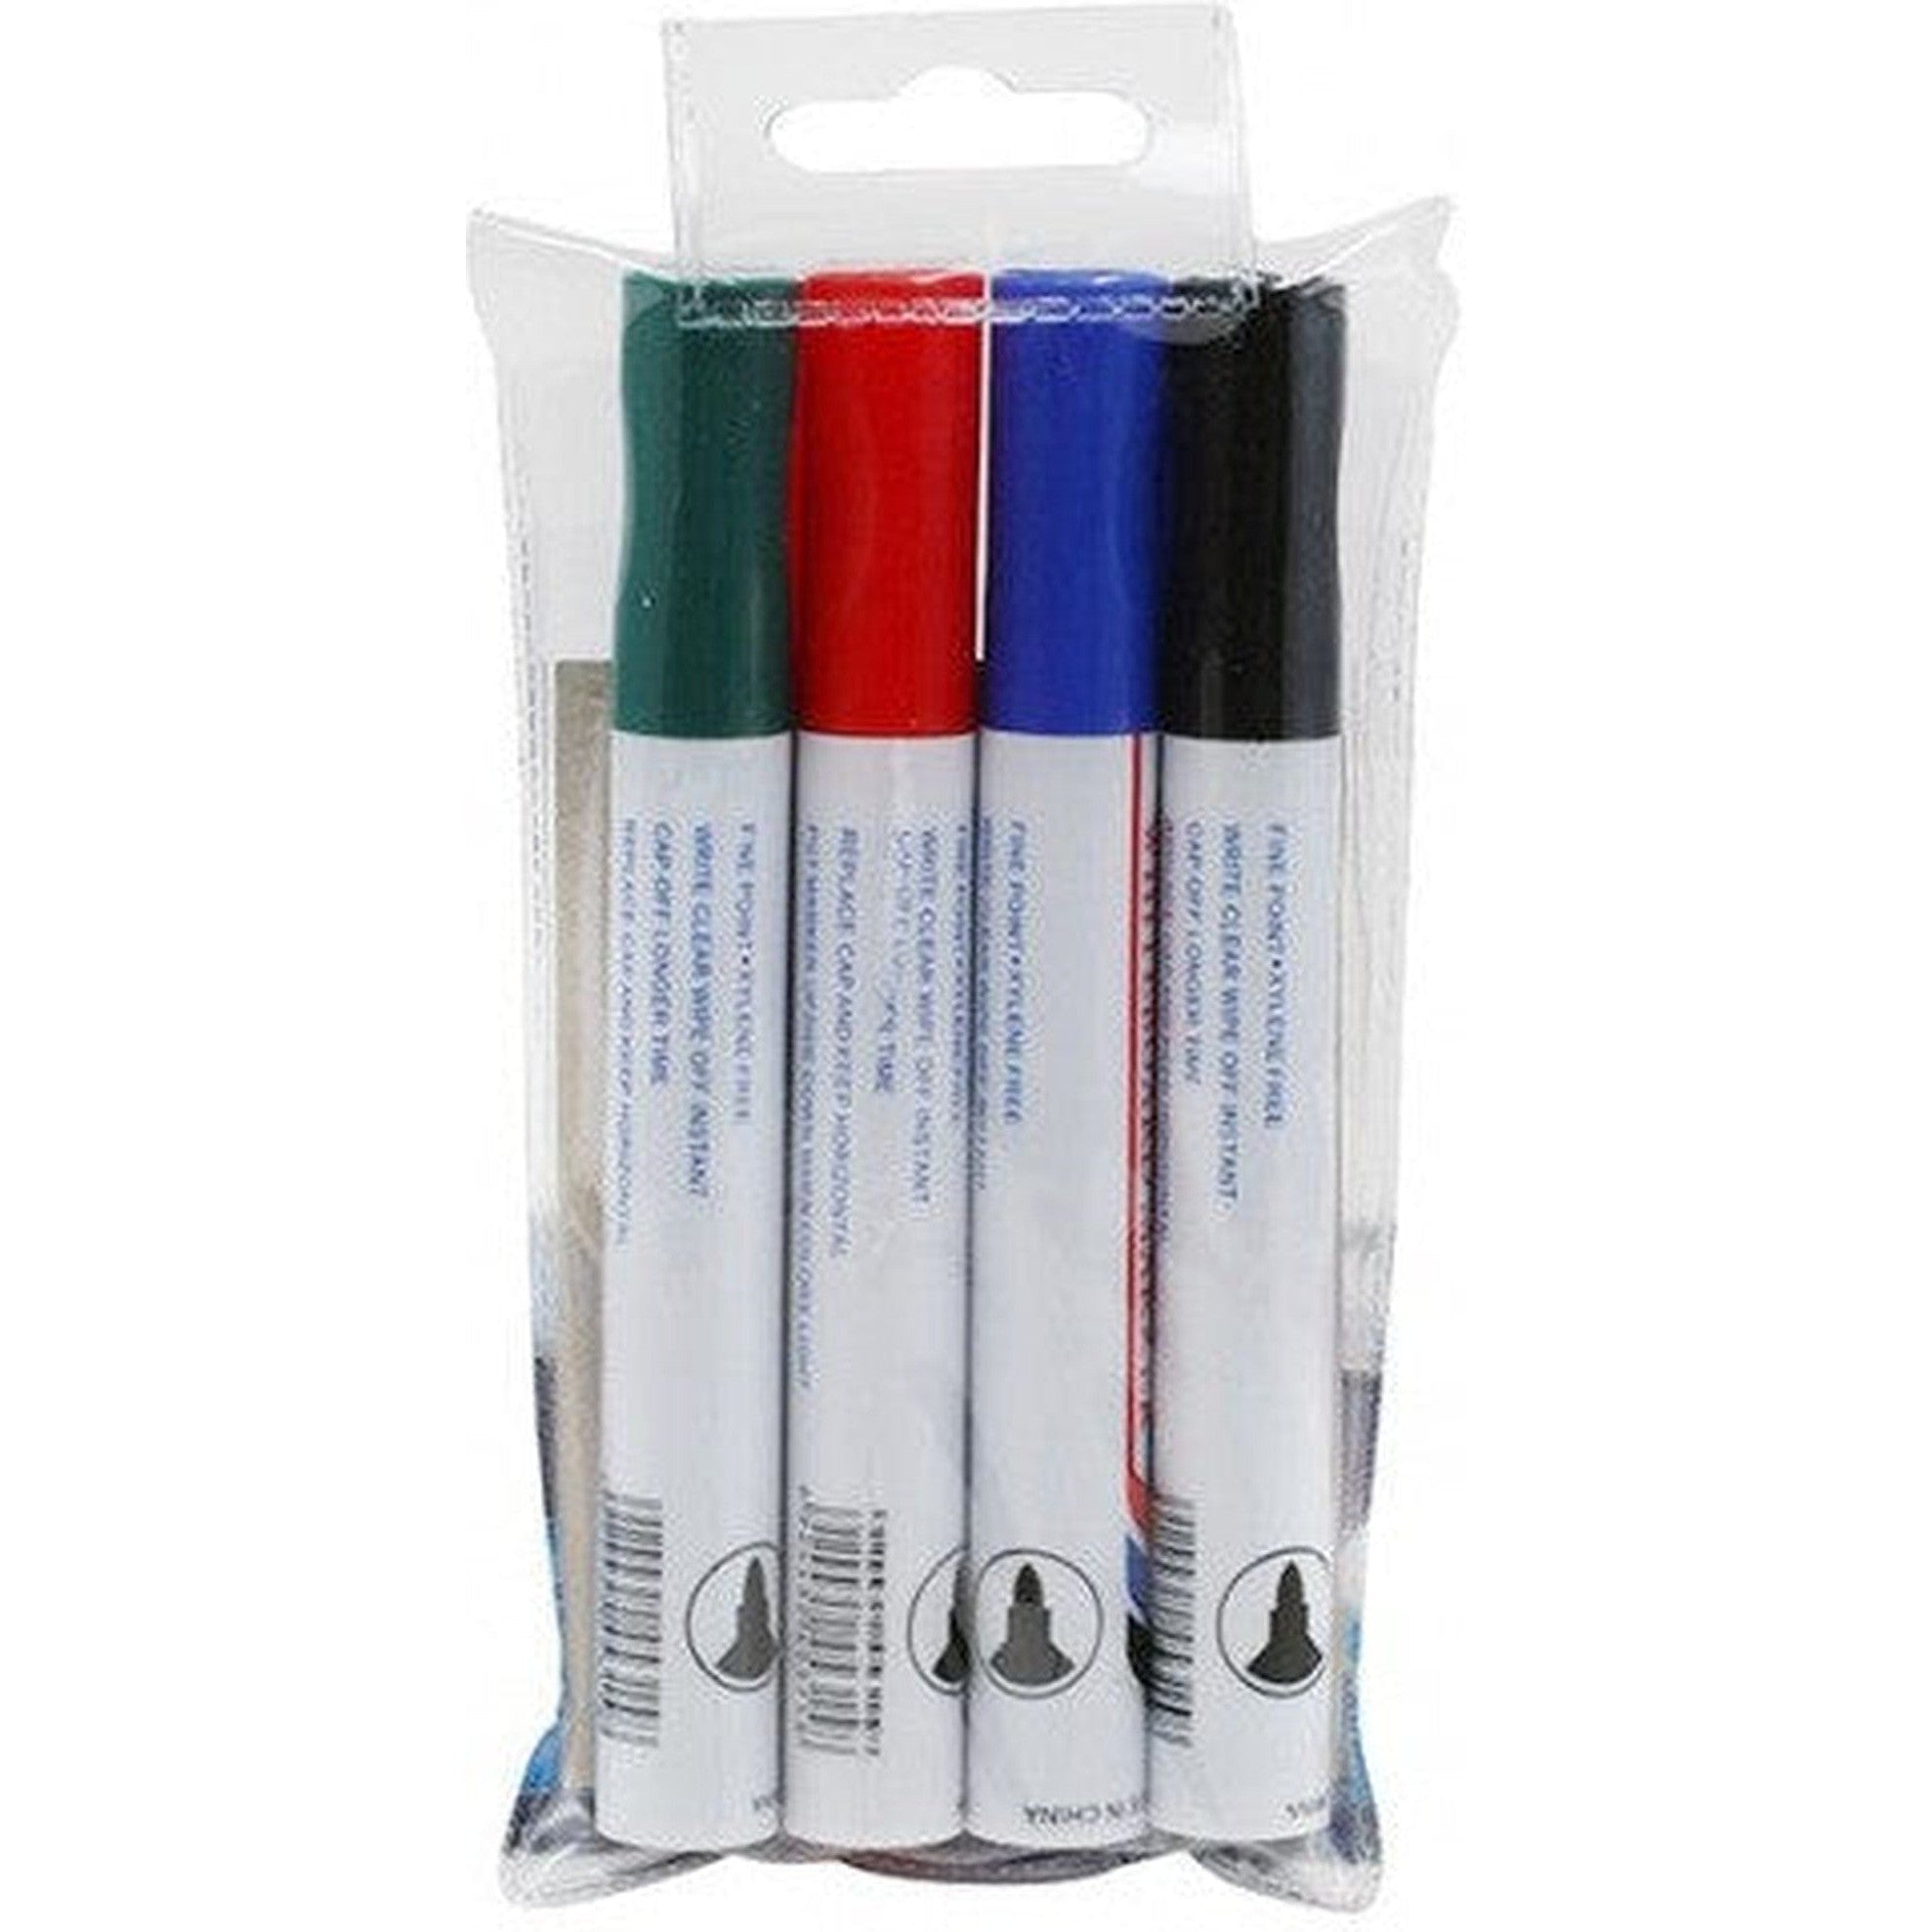 Maxi White Board Marker Set - 4 Pieces-Pens-Other-Star Light Kuwait